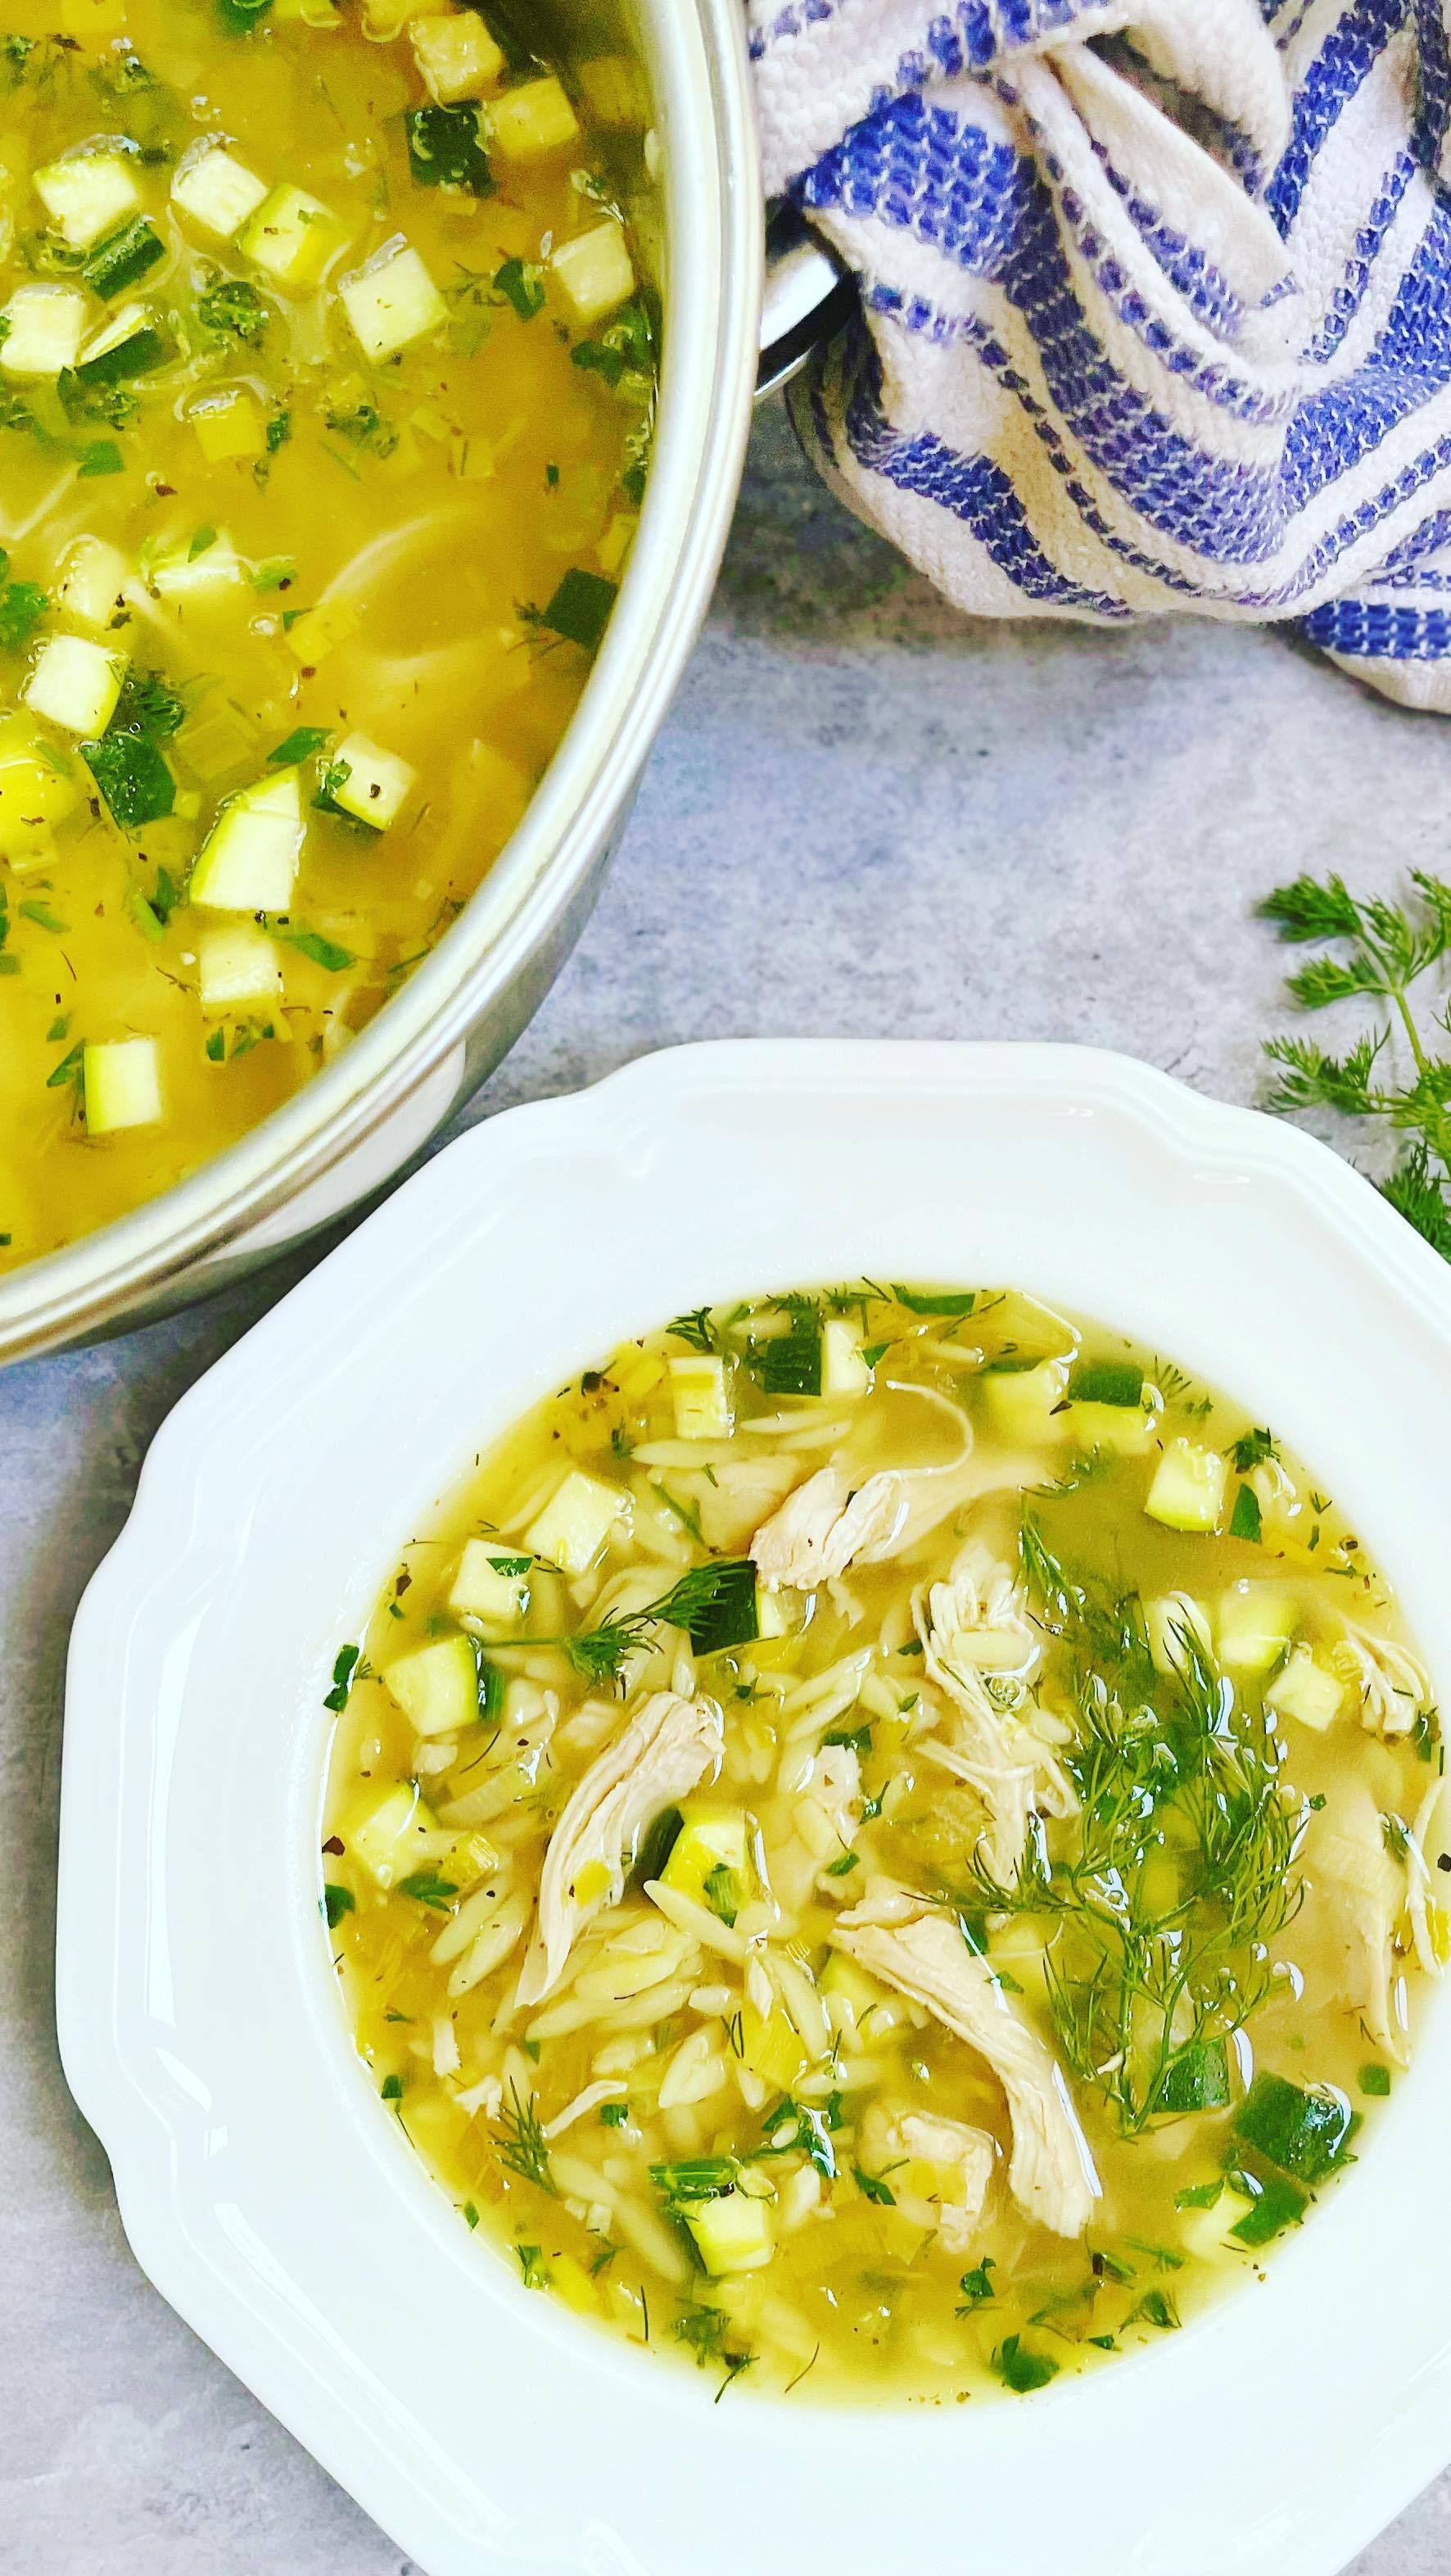 Lemony Chicken and Orzo Soup! Follow 
@dinnerreinvented for more recipes like this healthy and comforting soup that you can easily make in less than 30 minutes #orzo #soup #souprecipe #30minutemeals #chickensoup #chickennoodlesoup #easydinner #weeknightdinner ##roniproter #dinnerreinvented #pastarecipe #mediterraneanfood #greekfood